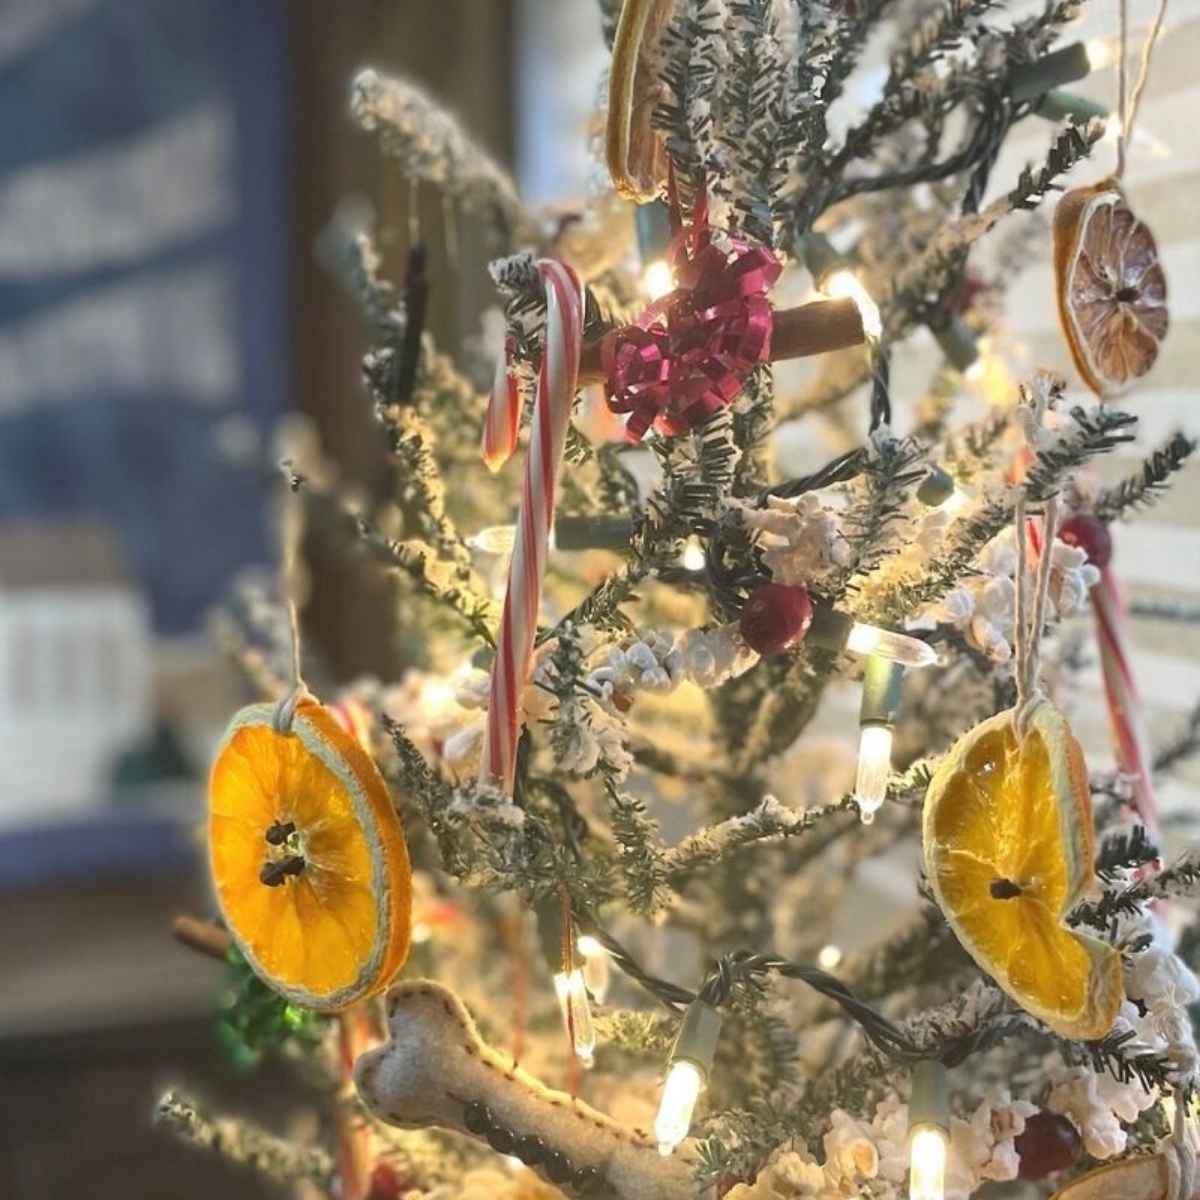 minni christmas tree decorated with dried orange slices